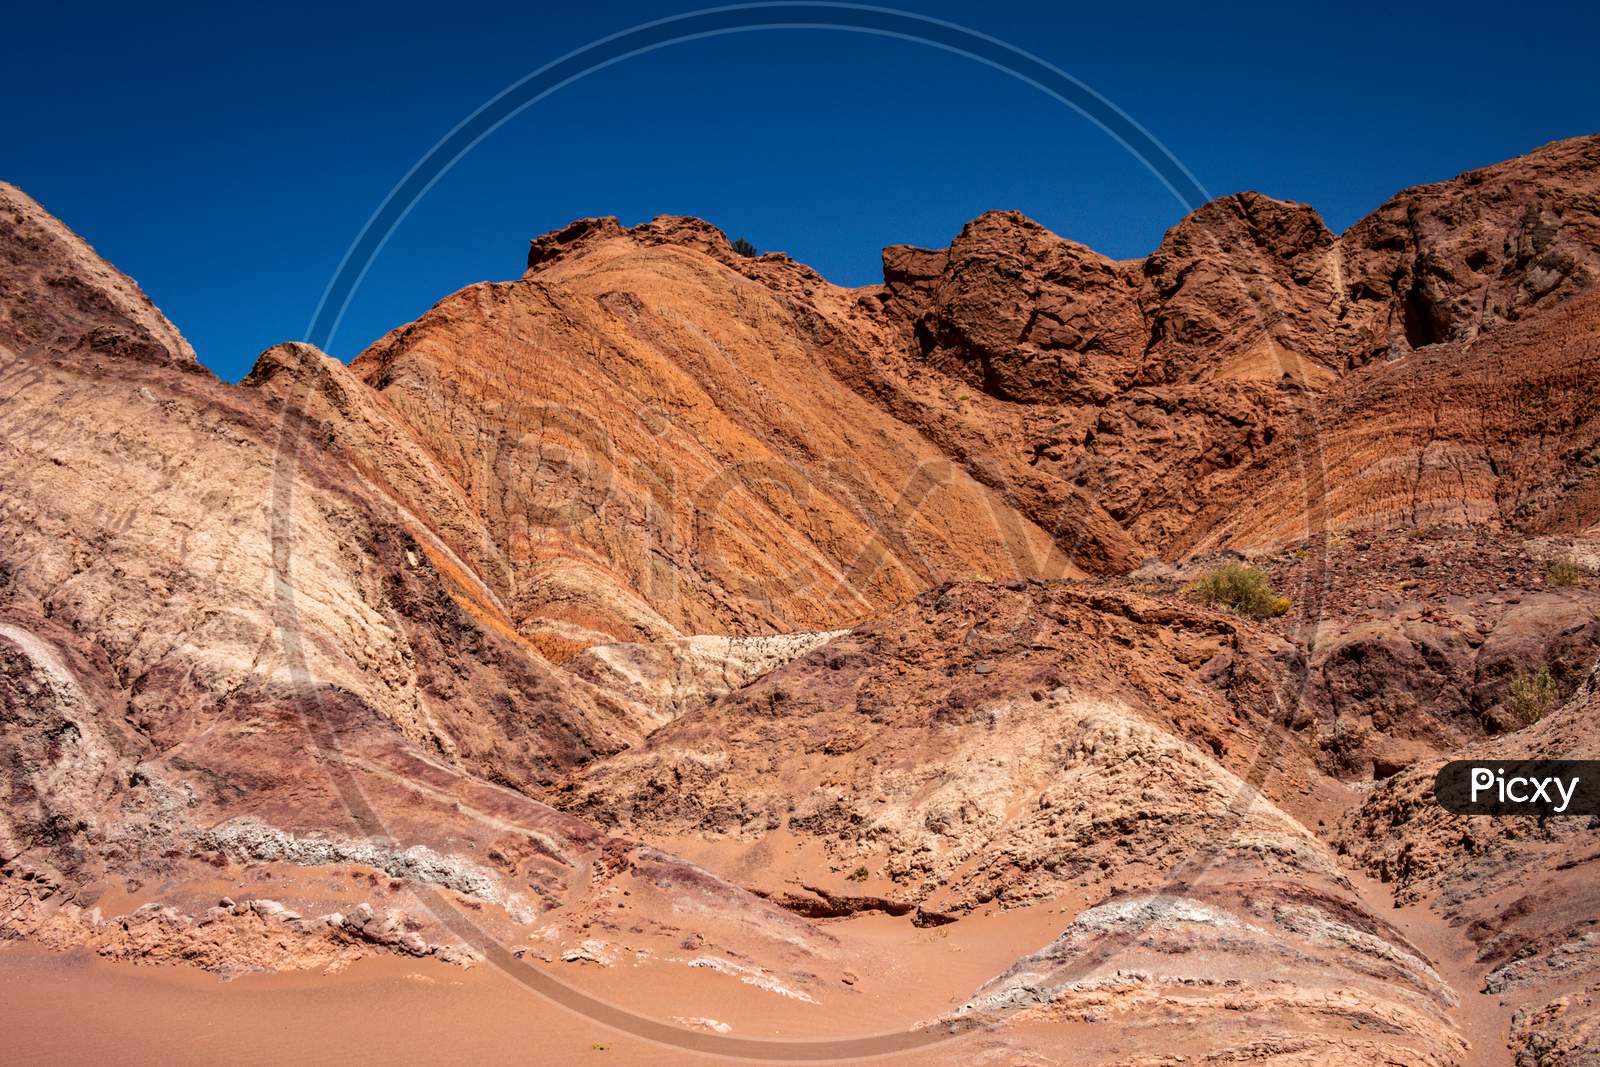 Geological Formations In The Talampaya National Park In The Argentine Republic. Huge Reddish Rocks